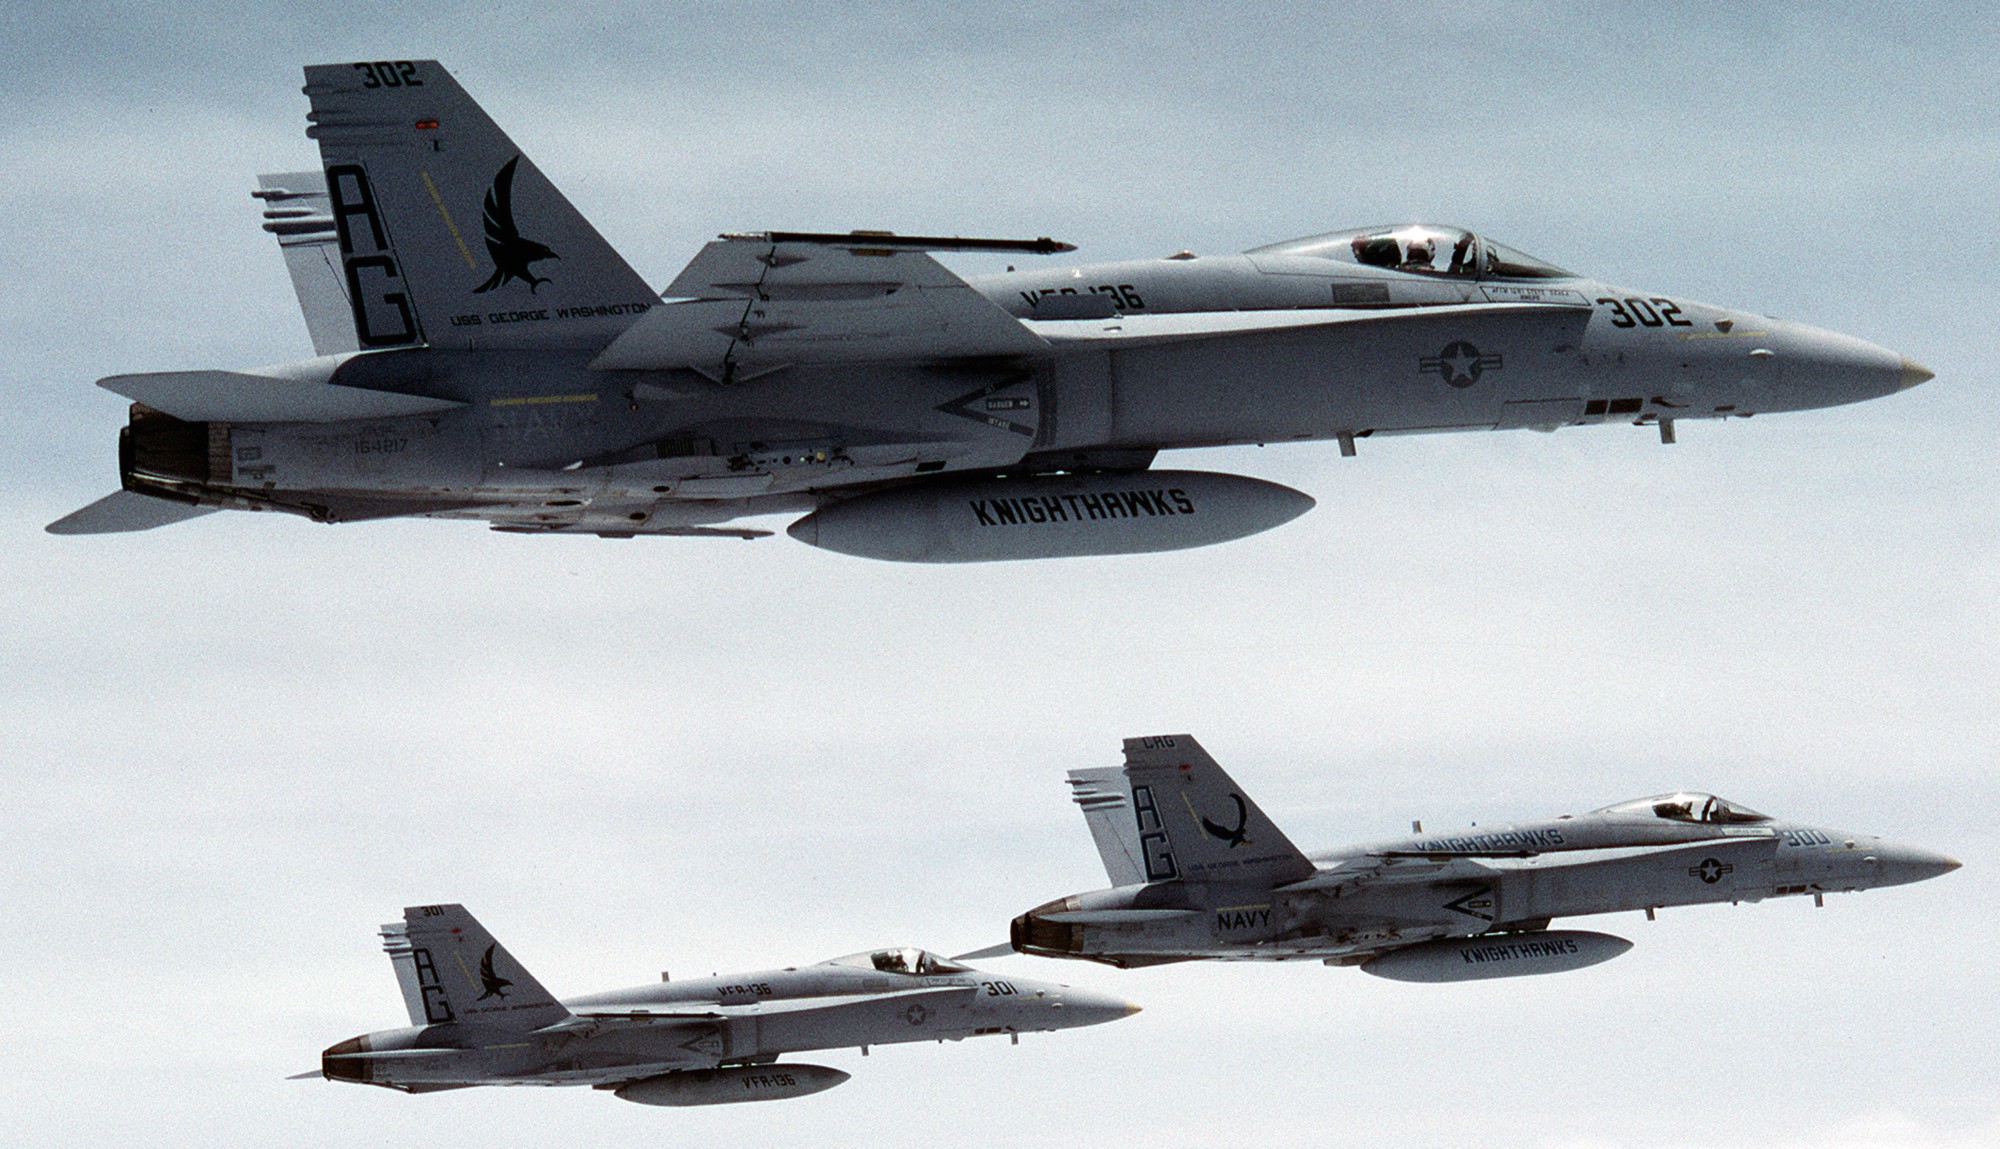 vfa-136 knighthawks strike fighter squadron f/a-18c hornet 1993 64 carrier air wing cvw-7